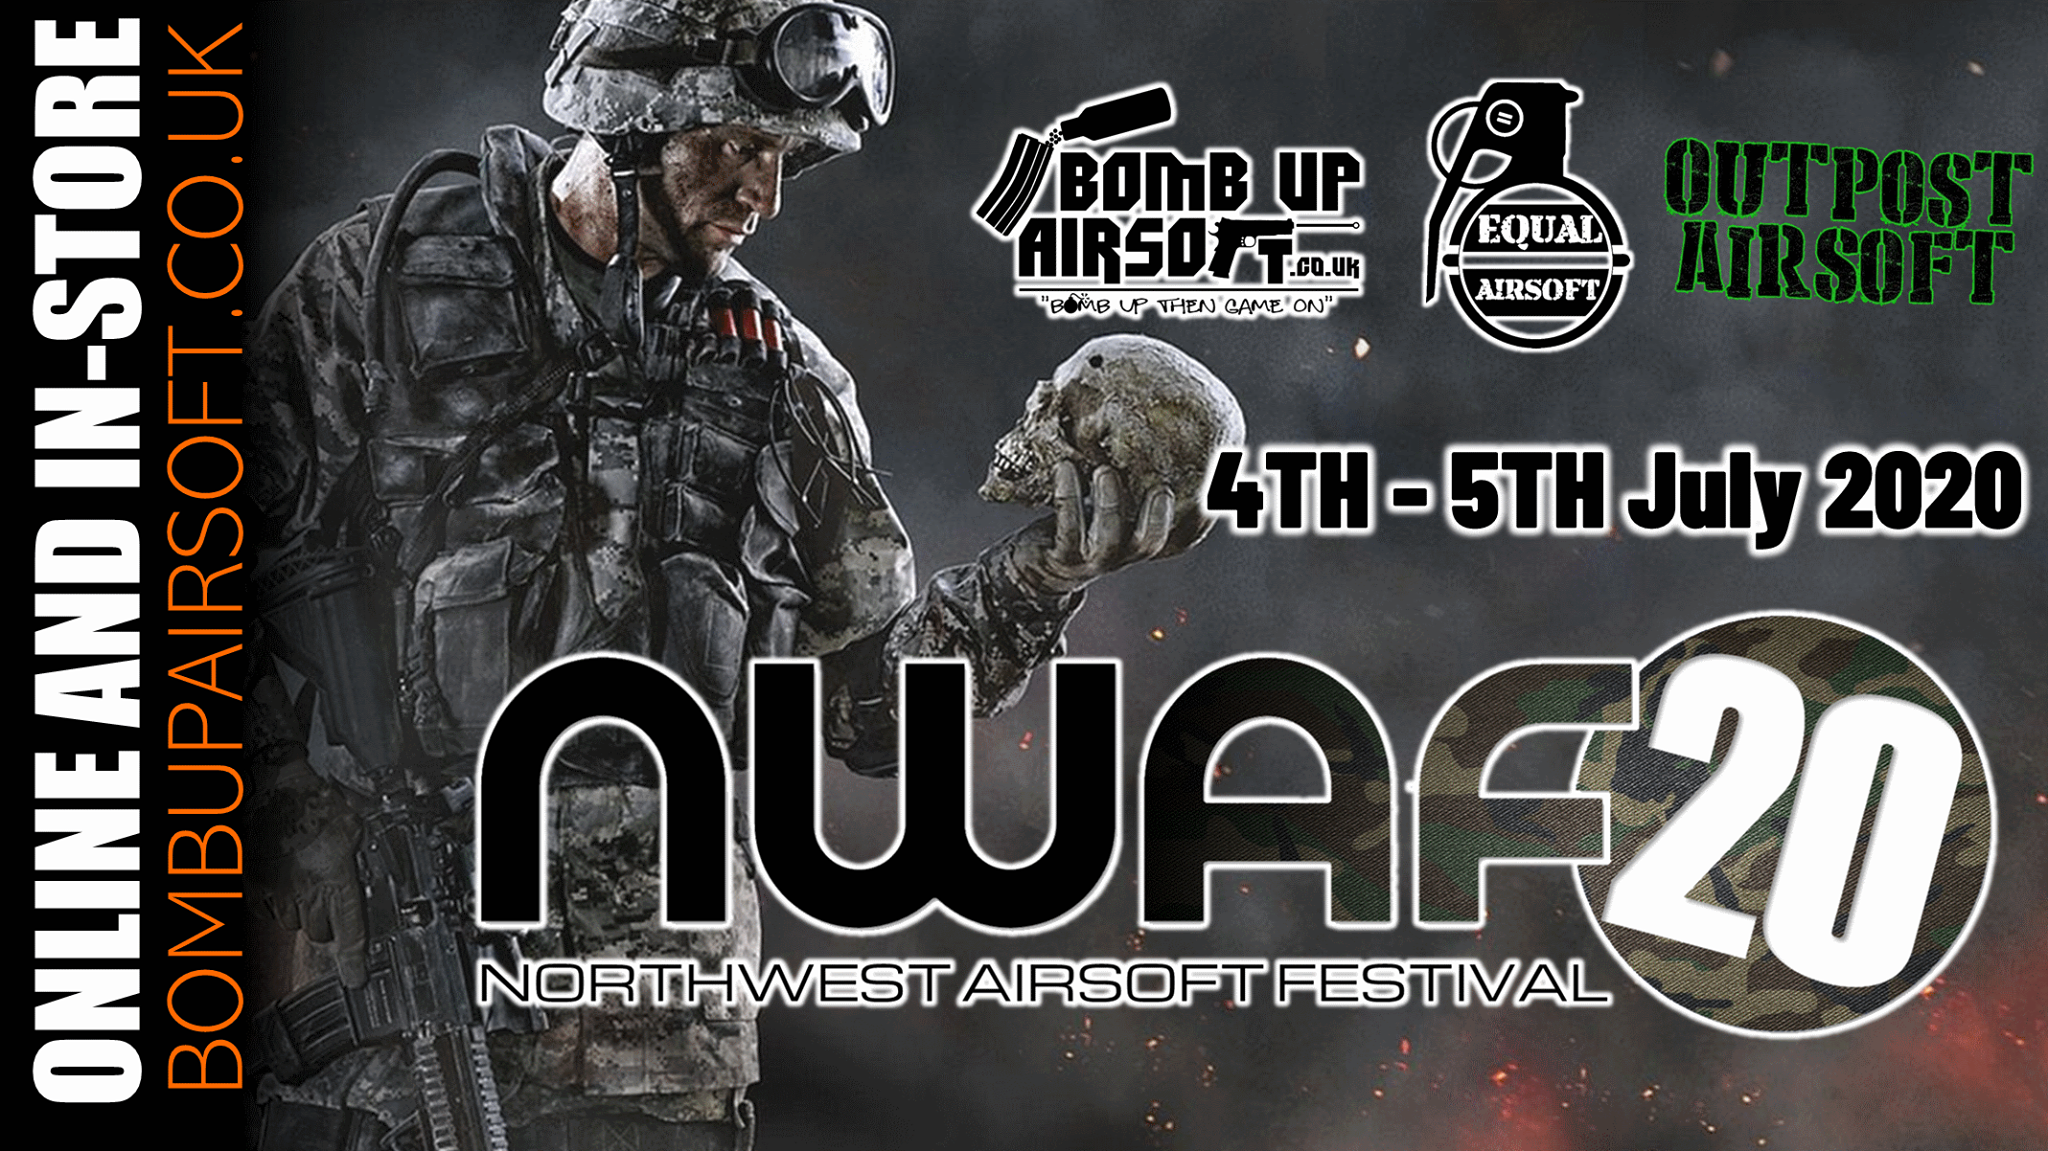 NWAF (North West Airsoft Fair) 4th and 5th July 2020